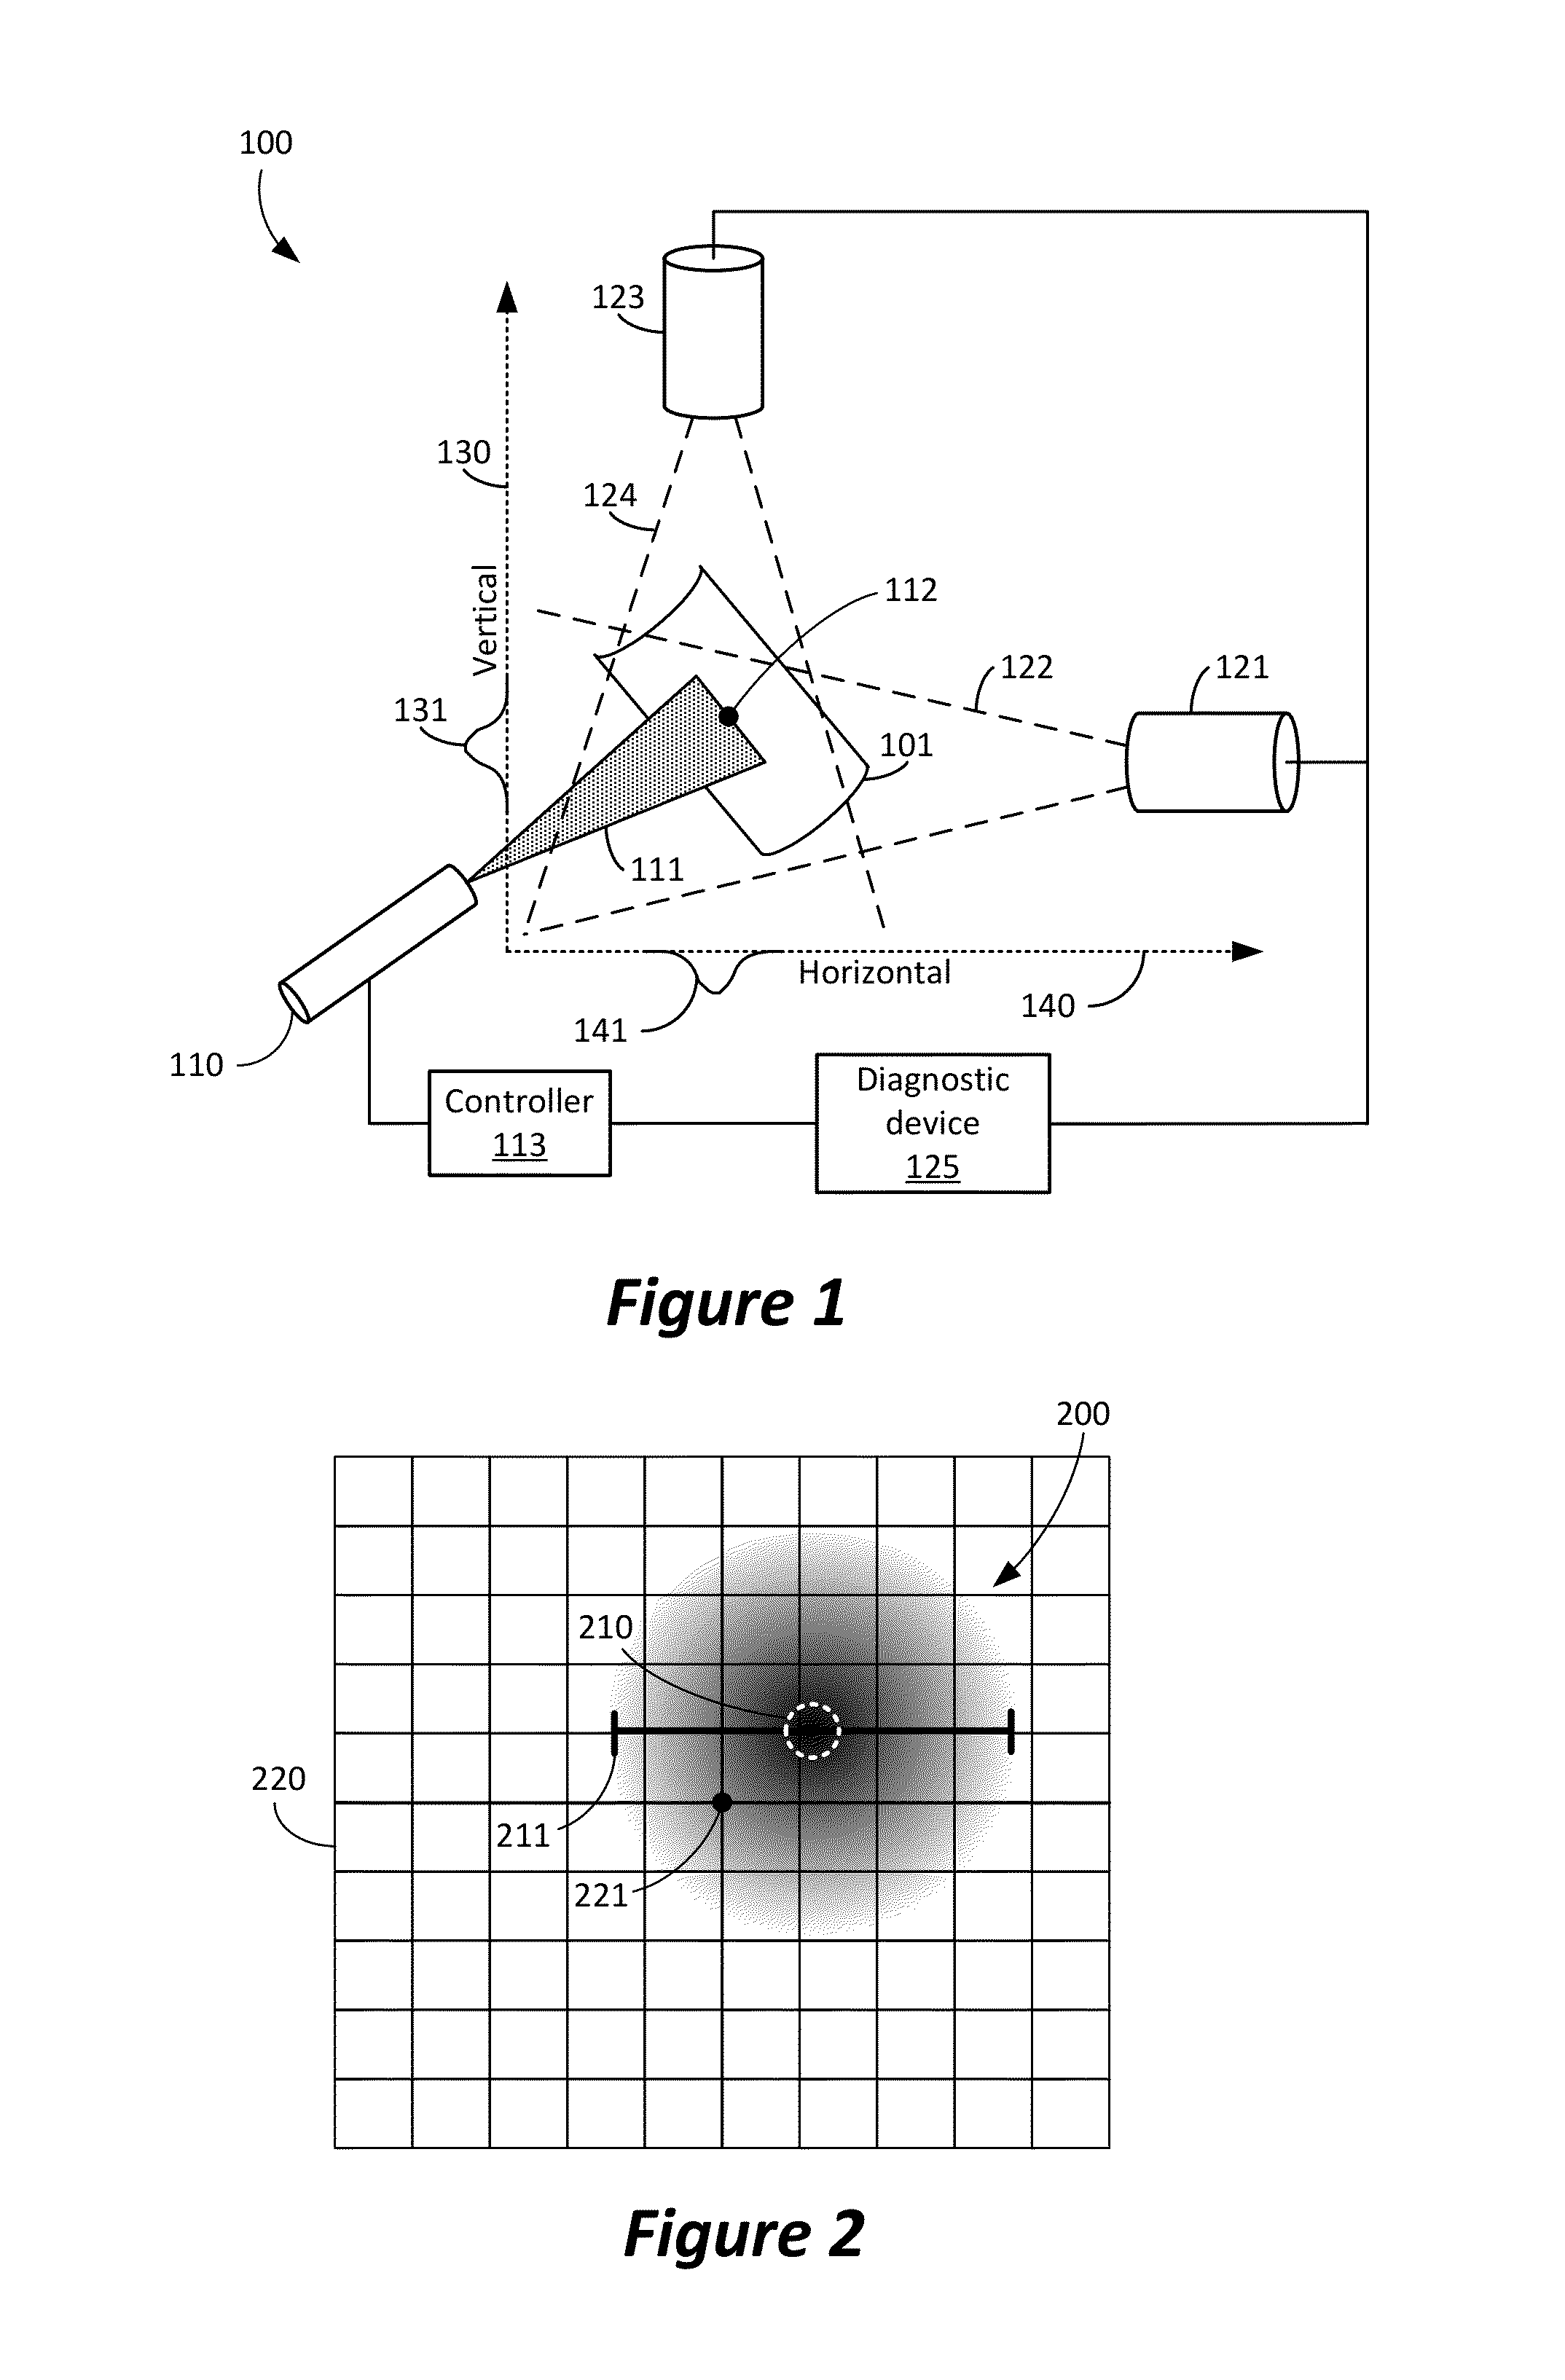 Spray Plume Position Feedback for Robotic Motion to Optimize Coating Quality, Efficiency, and Repeatability